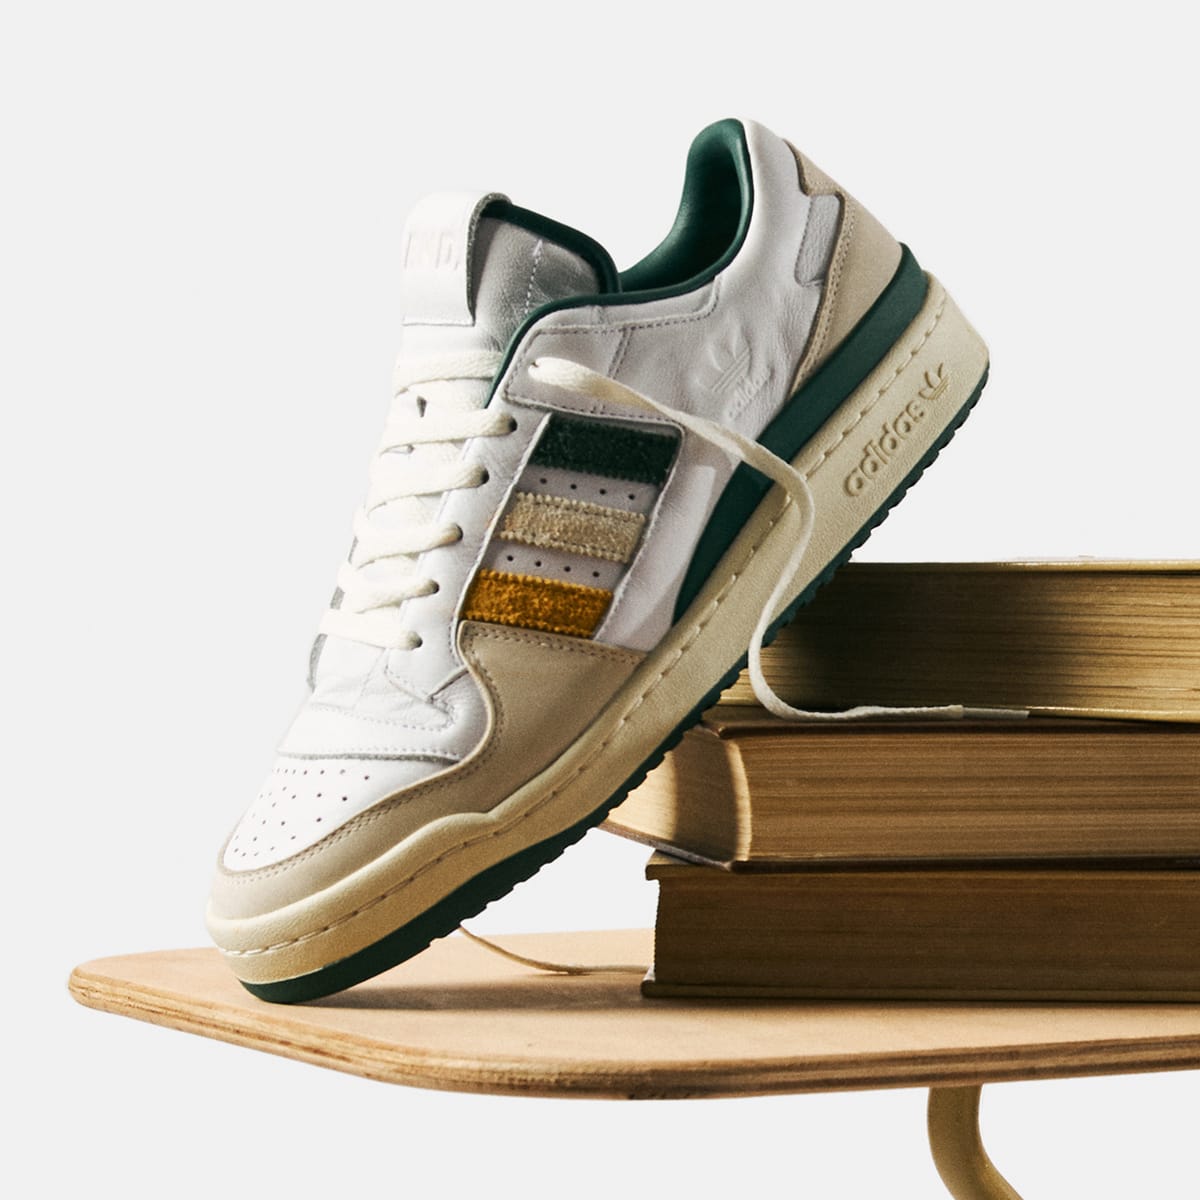 x Adidas Forum Advance 'Varsity' Off White & Green) END. Launches